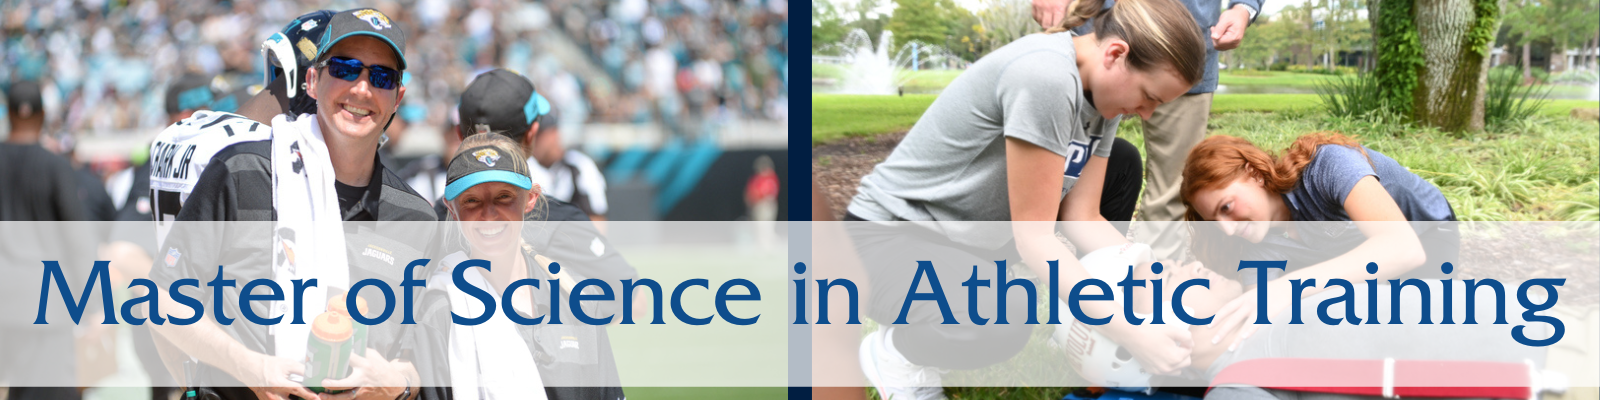 Master of Science in Athletic Training Banner, Jacksonville jaguars interns, and hands on experience with 3 students.